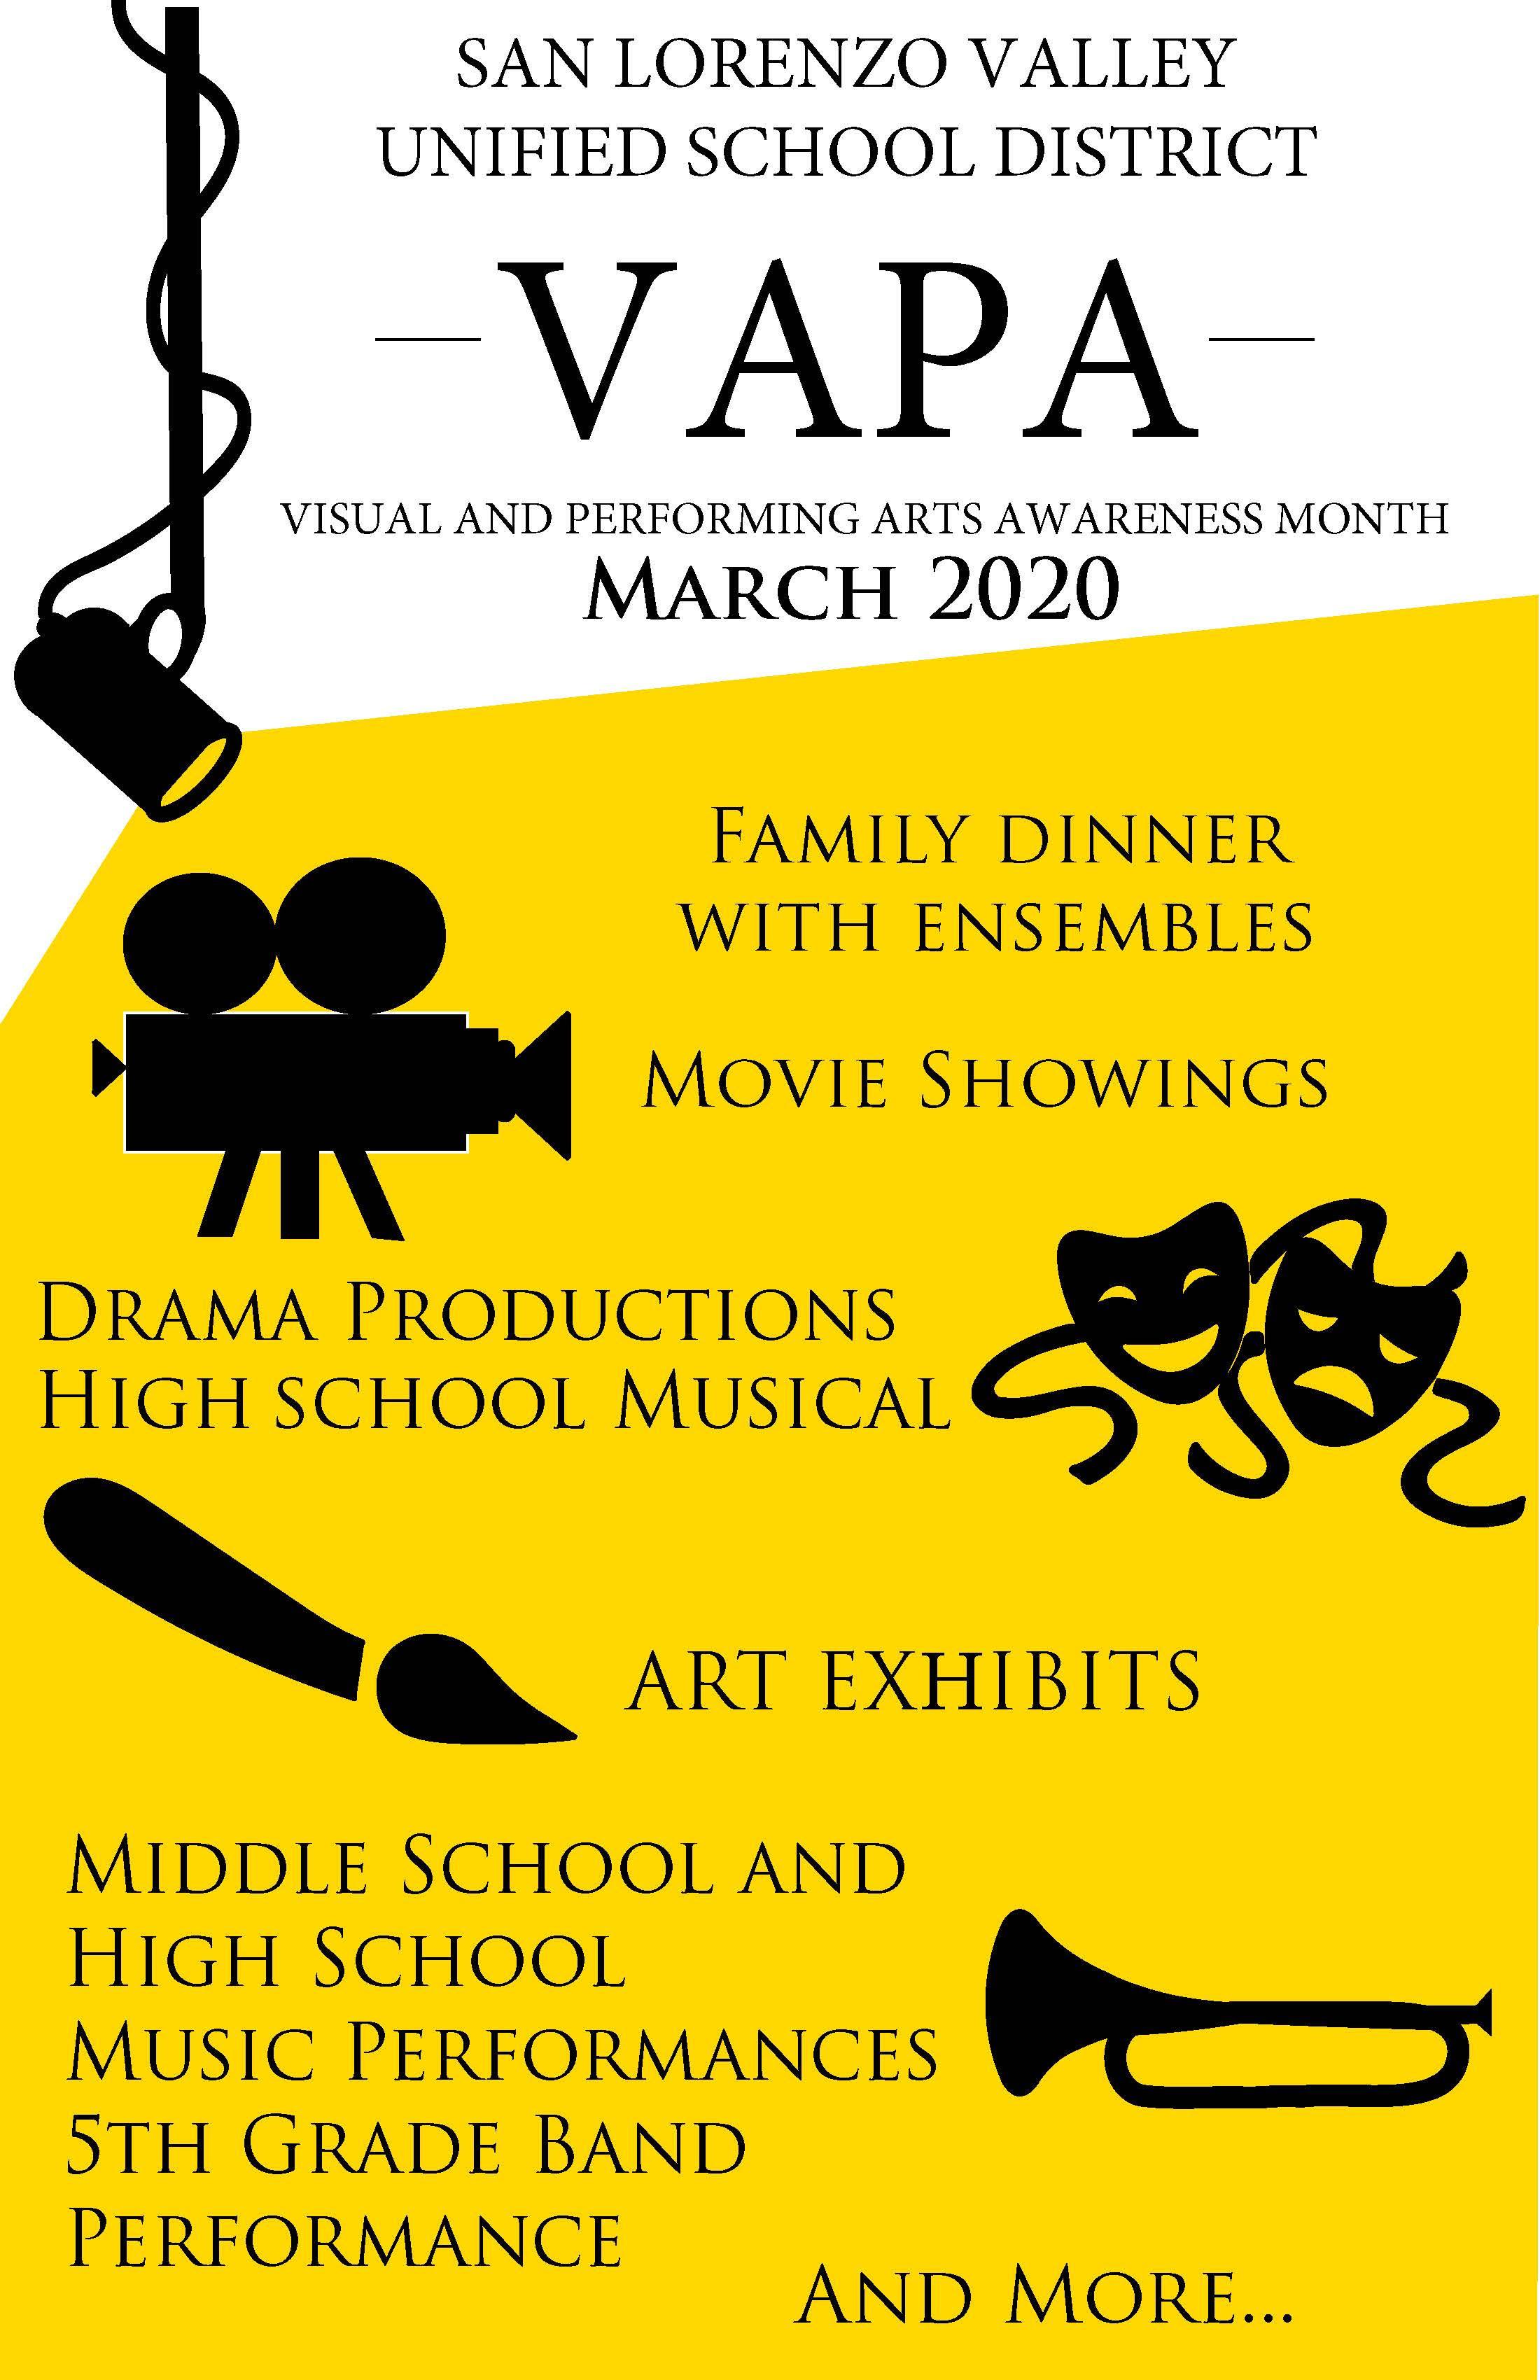 visual and performing arts awareness month march 2020; call 336-4022 for information